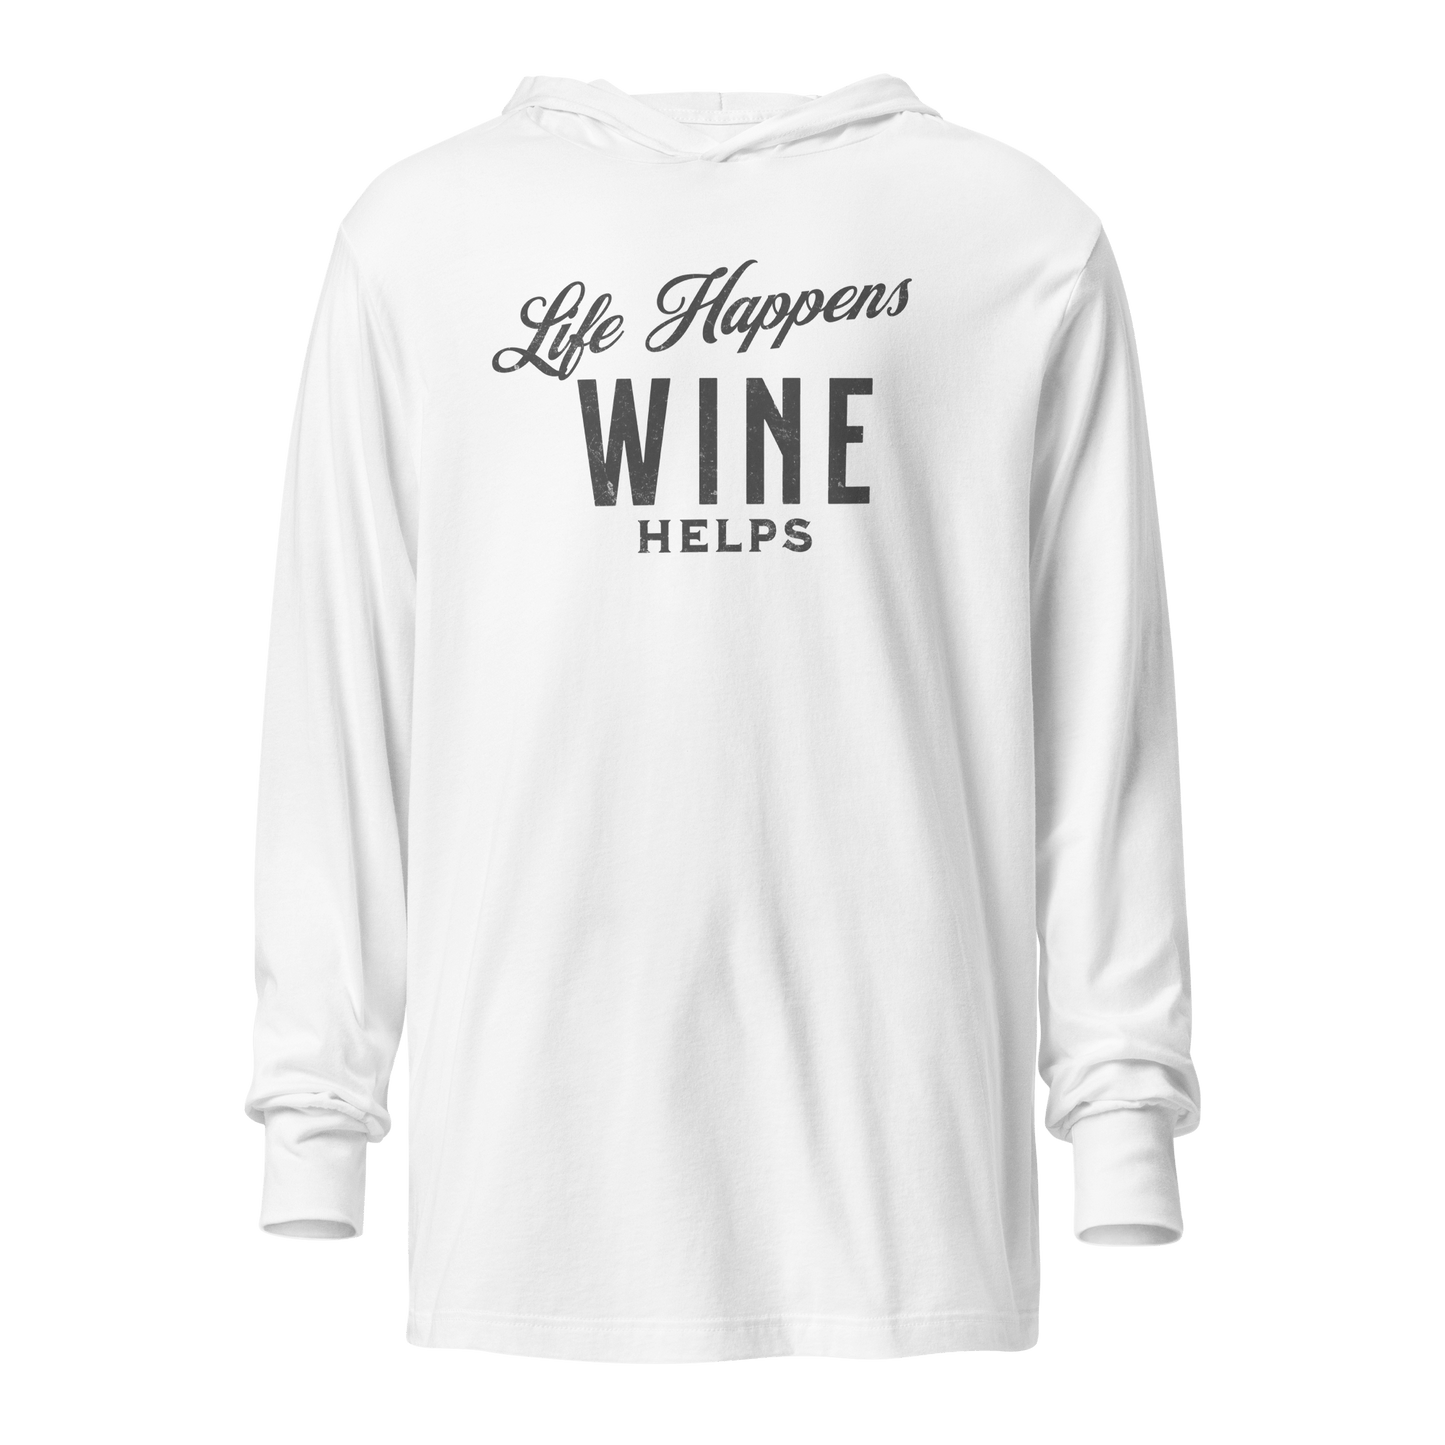 "Life Happens Wine Helps" Hoodie - Funny ApparelStay comfy with our lightweight hoodie. Perfect for layering, made from soft materials. Ideal funny apparel for everyday style.